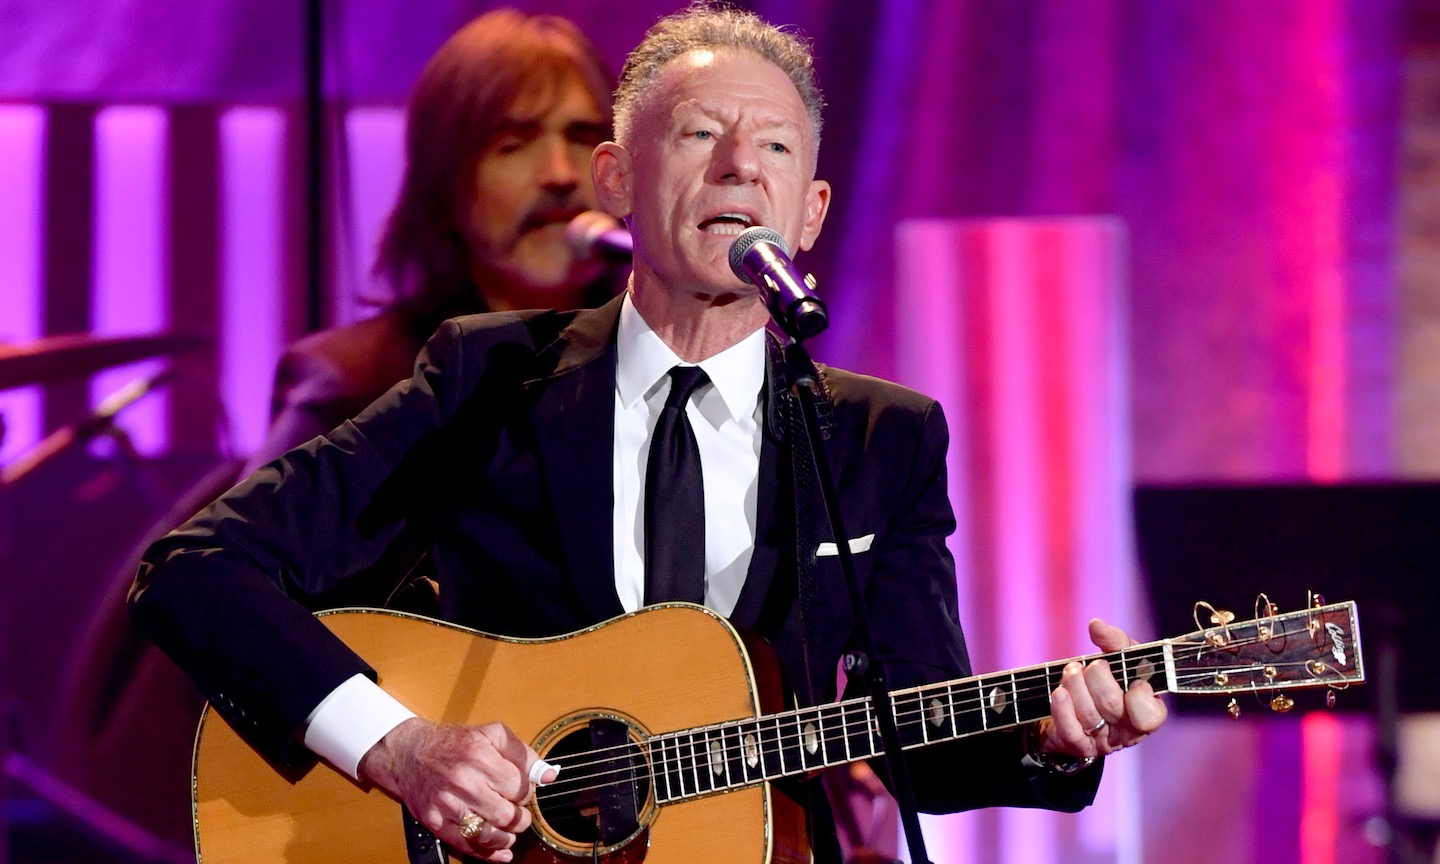 Lyle Lovett Announces Early Shows Run New Group Of Acoustic 2023 For